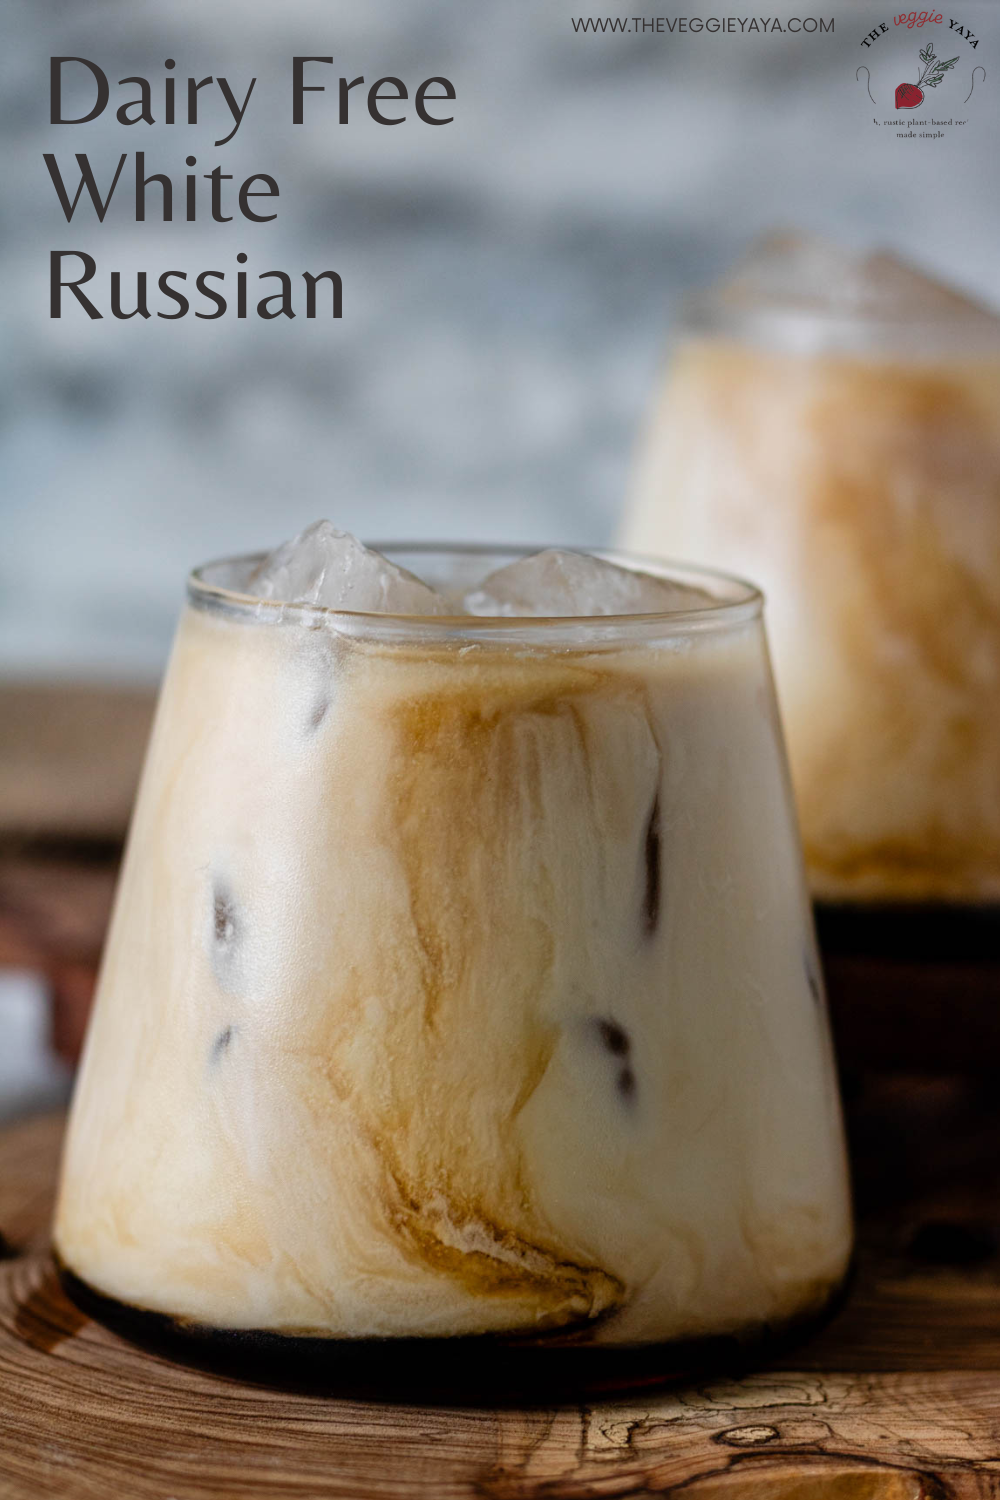 Dairy free white Russian pin with grey text.